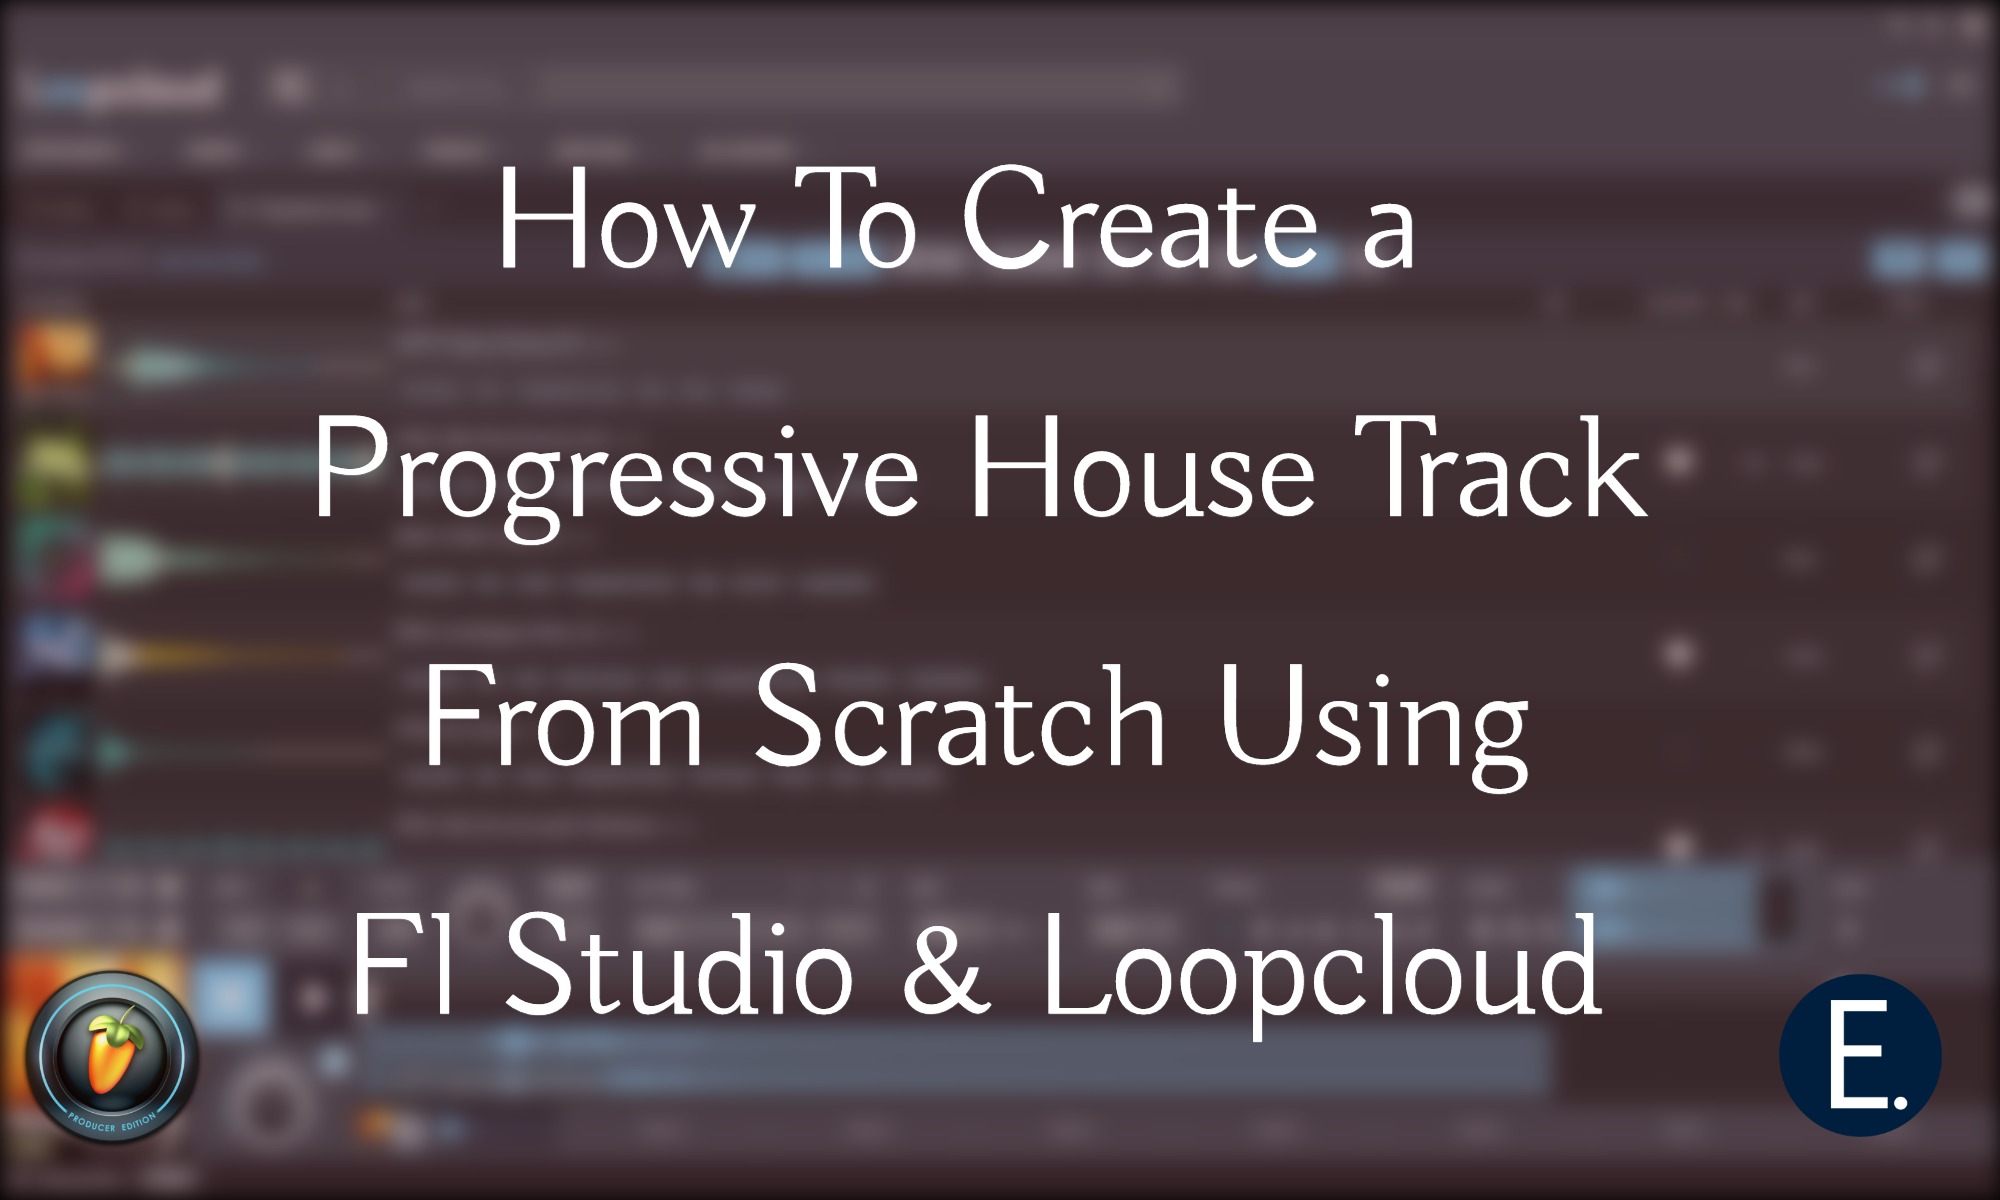 Creating a Progressive House Track From Scratch Using (Fl Studio & Loopcloud) [Video]